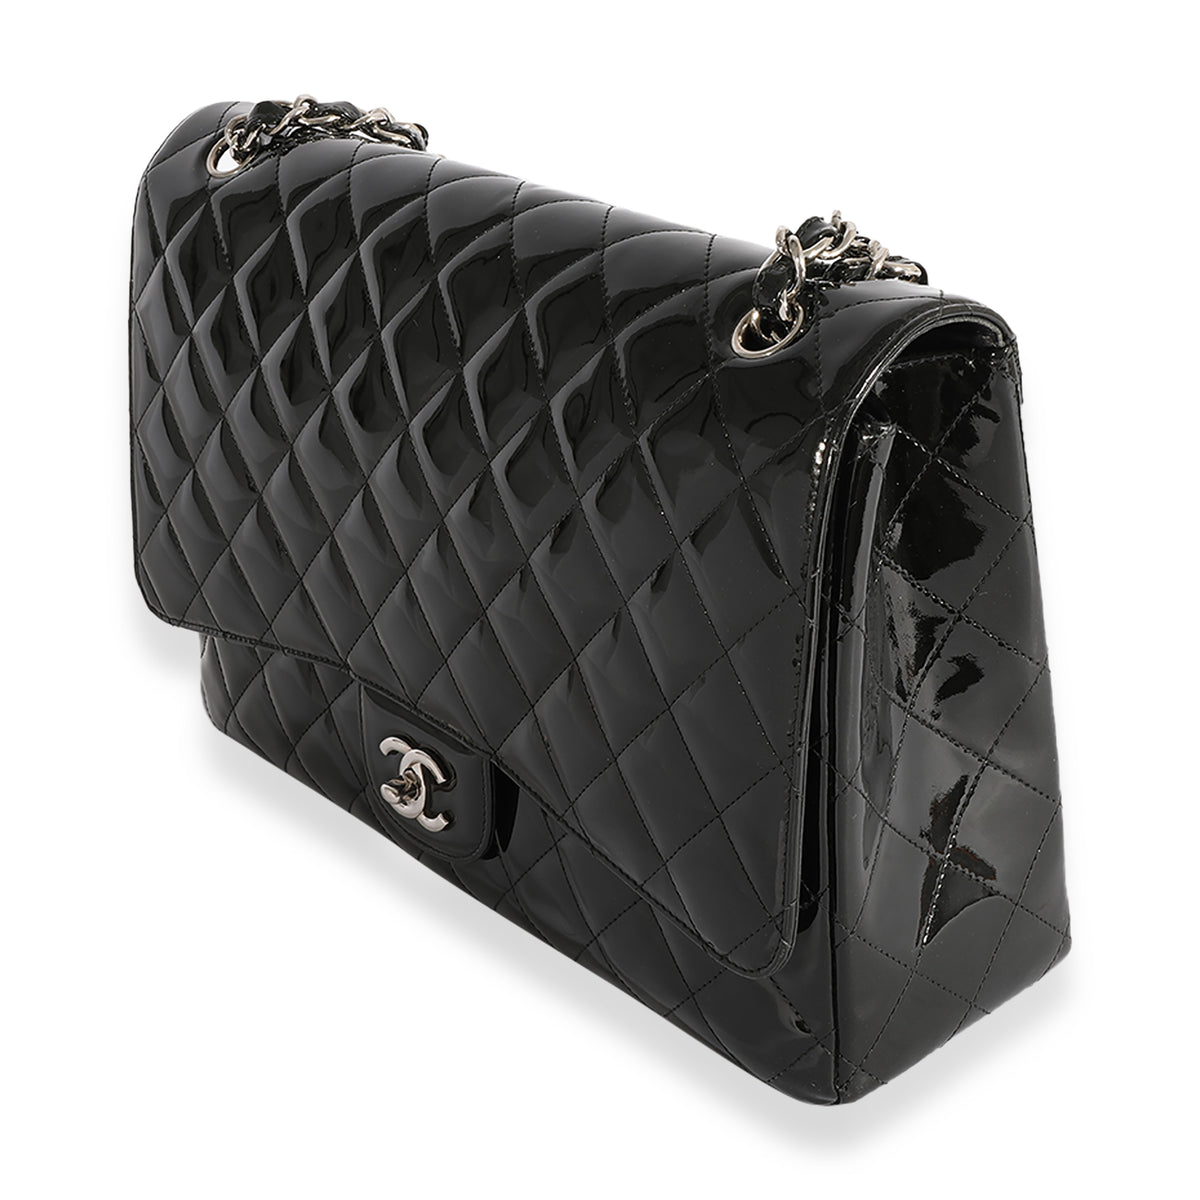 Chanel Black Quilted Patent Leather Maxi Classic Single Flap Bag, myGemma